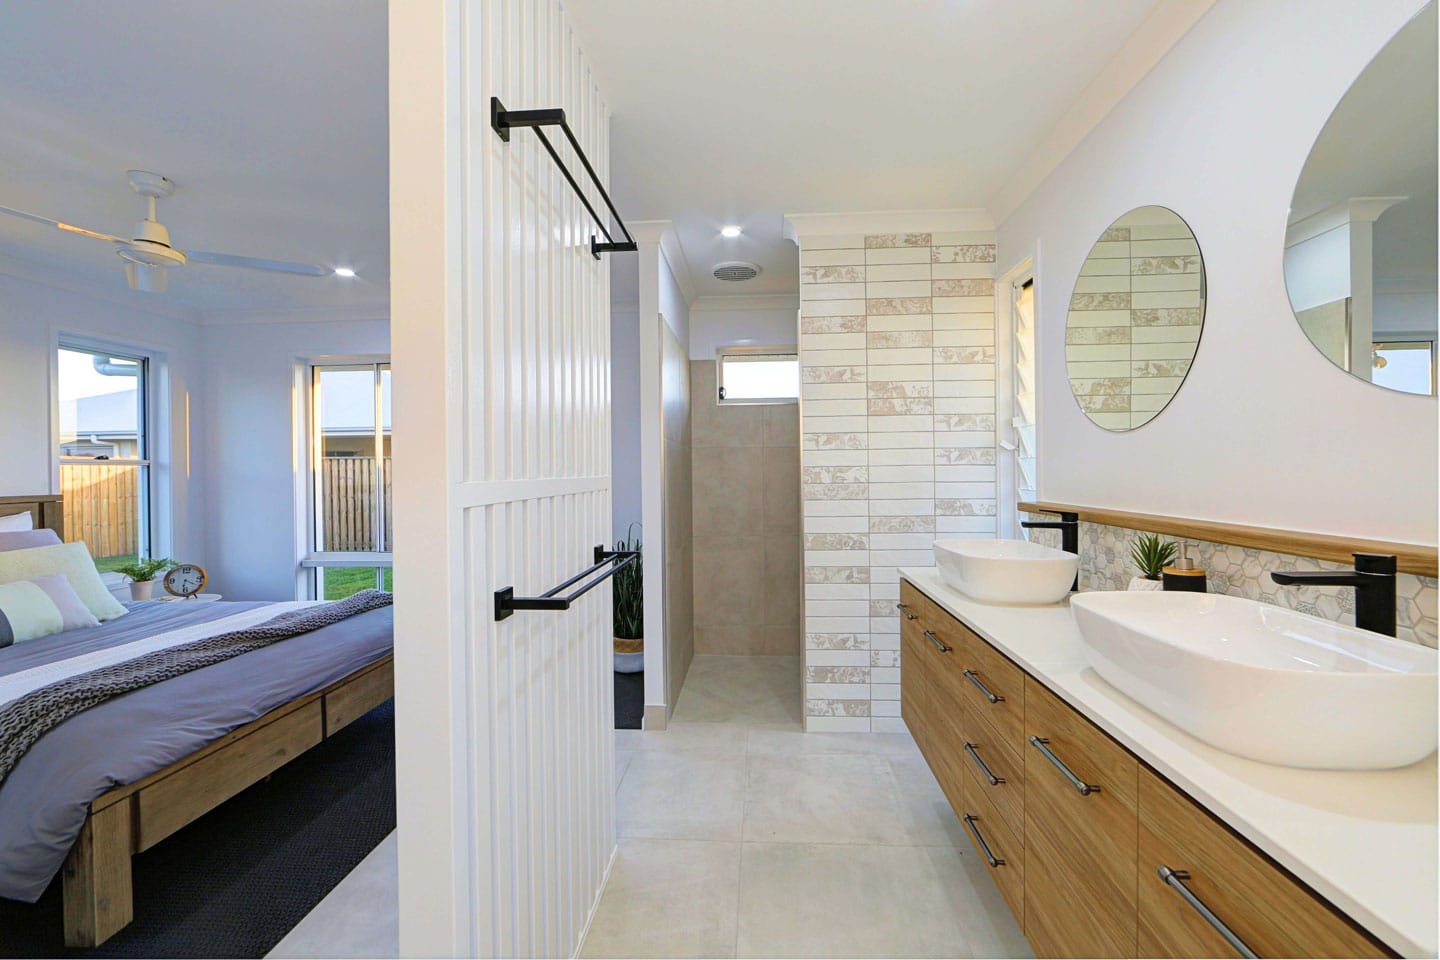 An open ensuite design with feature wall tiles - Tiles Bundaberg, QLD